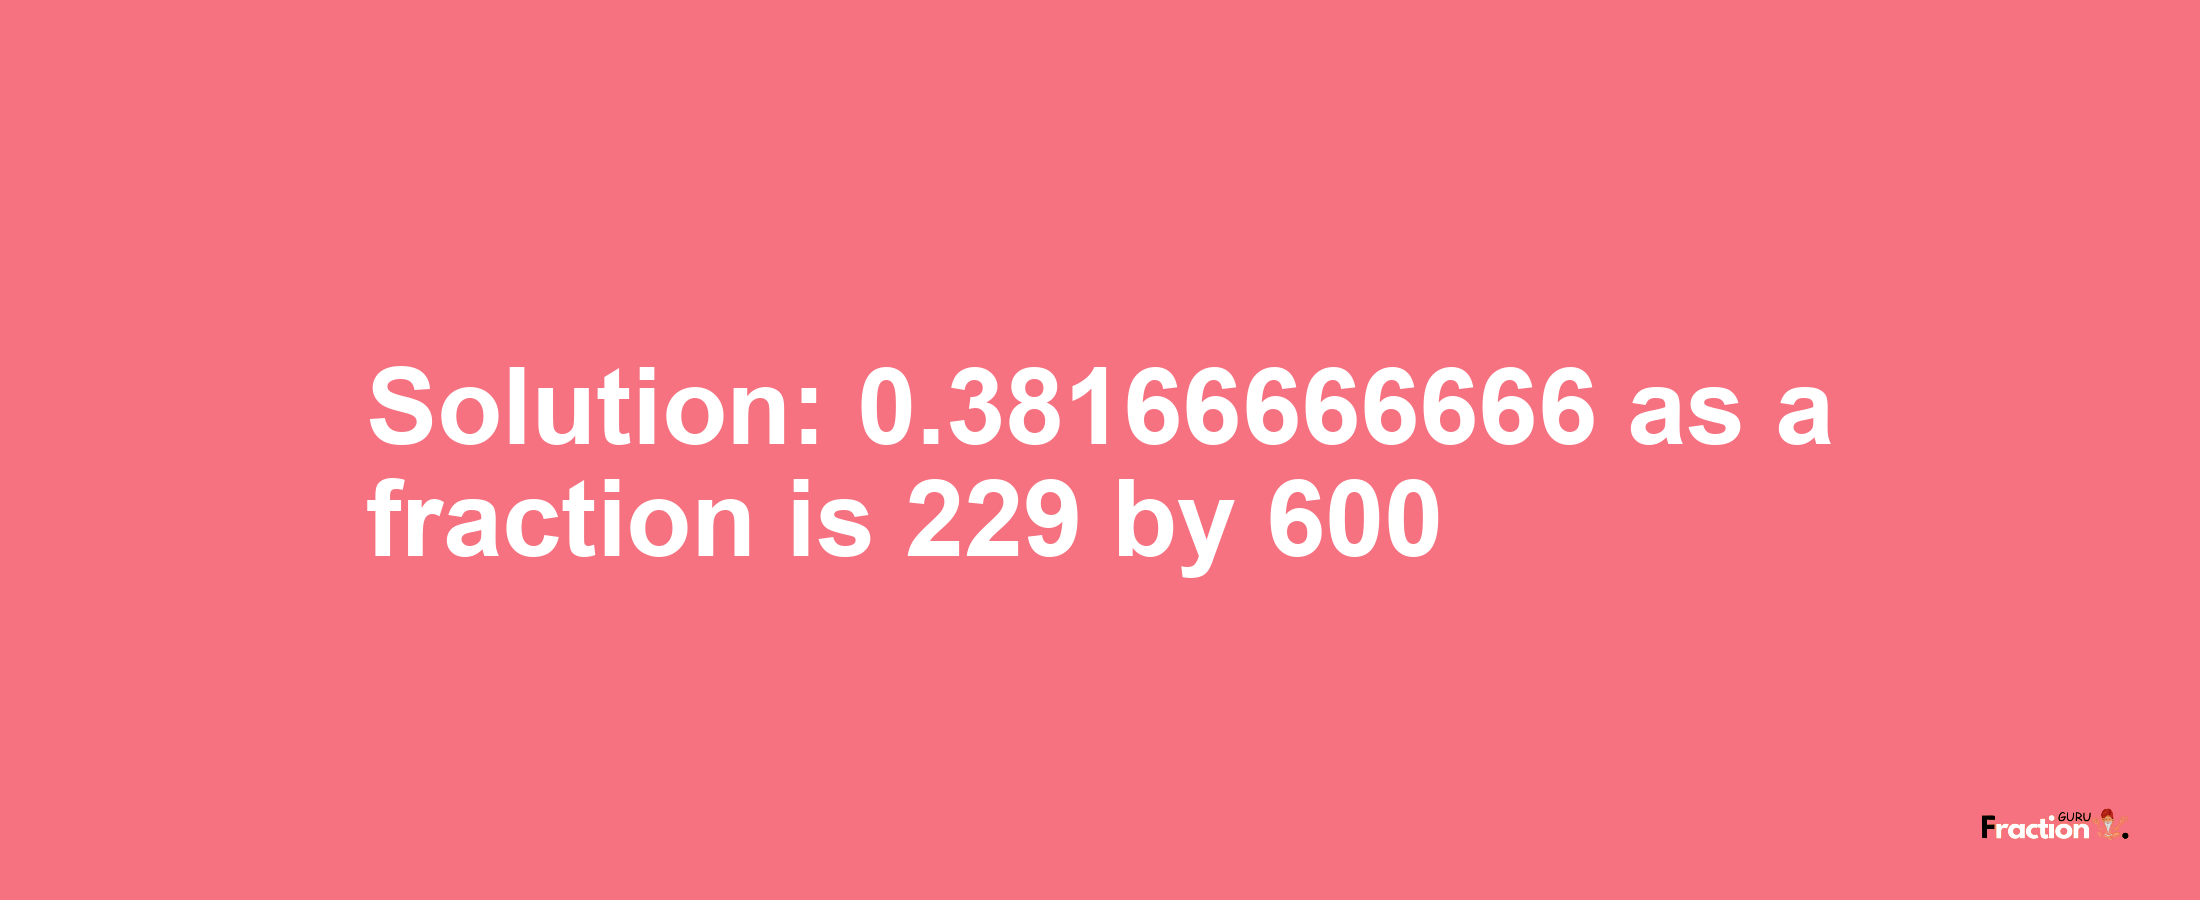 Solution:0.38166666666 as a fraction is 229/600